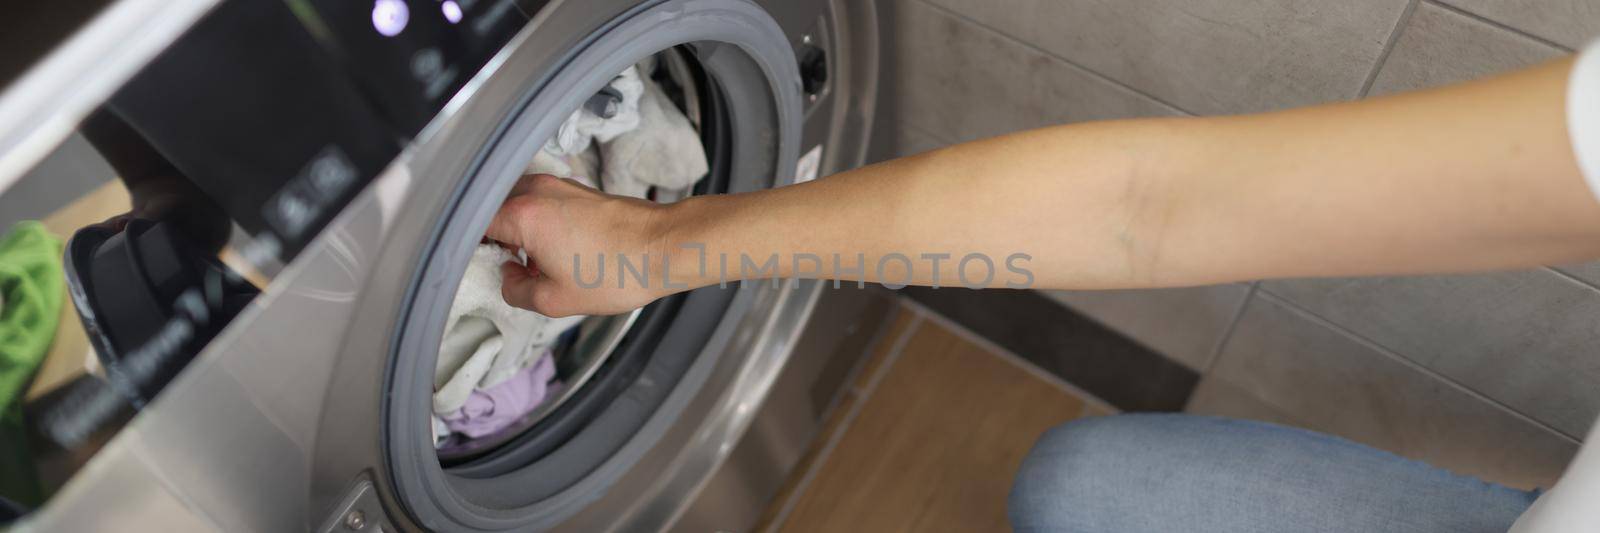 Top view of woman loading washing machine with dirty clothes, modern device keep clothes clean and smelly. Household, bathroom, domestic chores, cleaning day concept